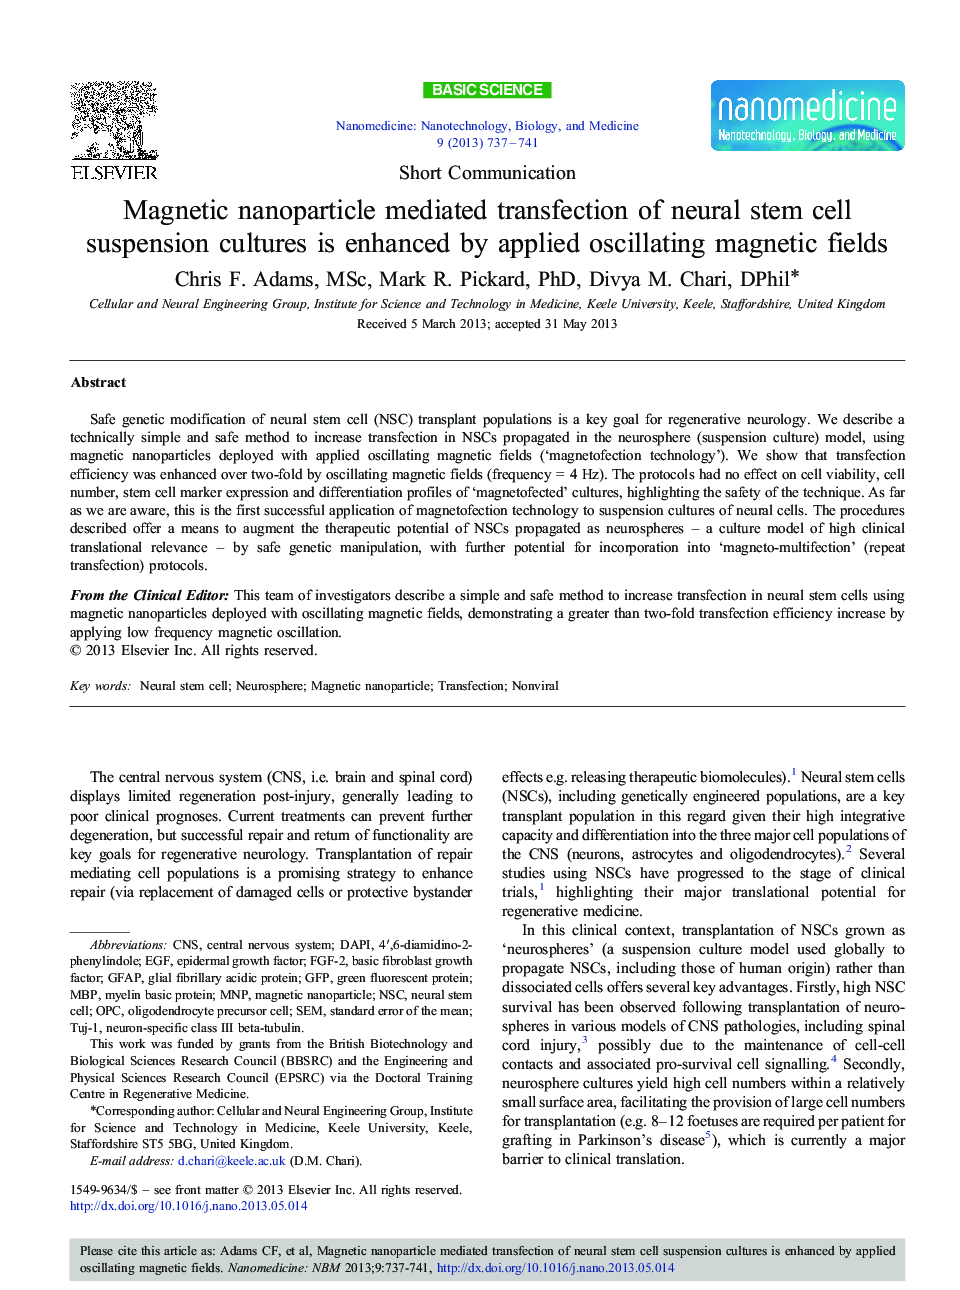 Magnetic nanoparticle mediated transfection of neural stem cell suspension cultures is enhanced by applied oscillating magnetic fields 